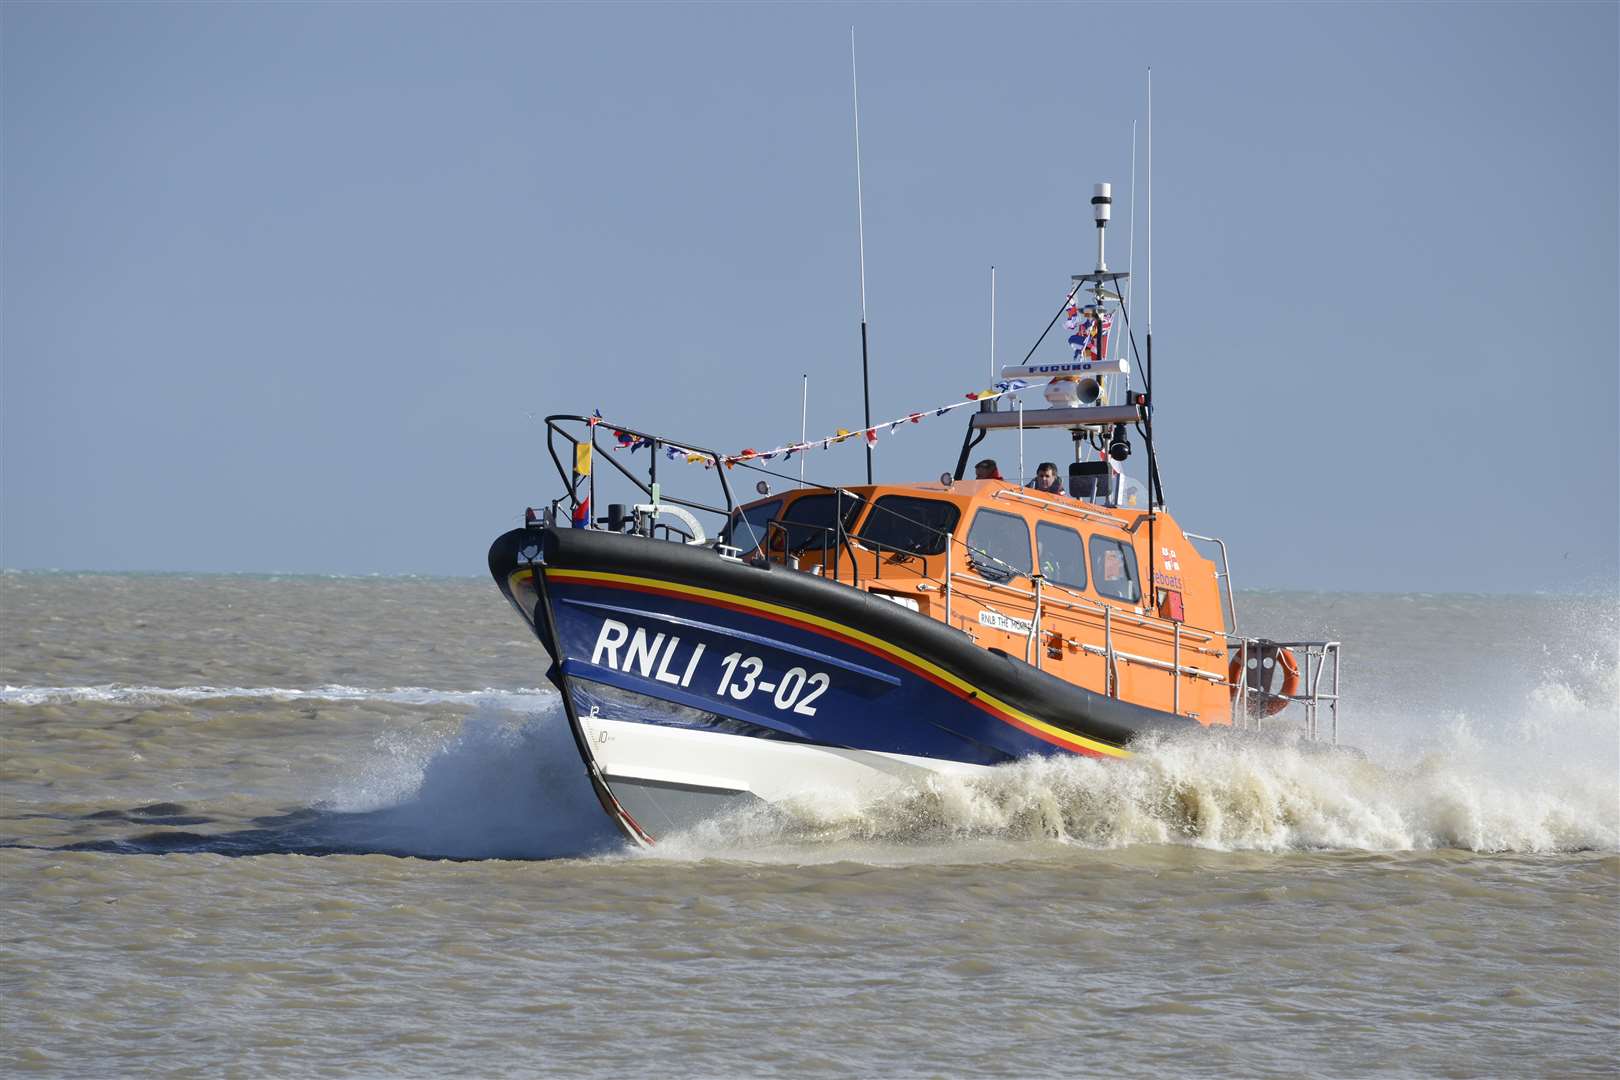 The Dungeness lifeboat The Morrell